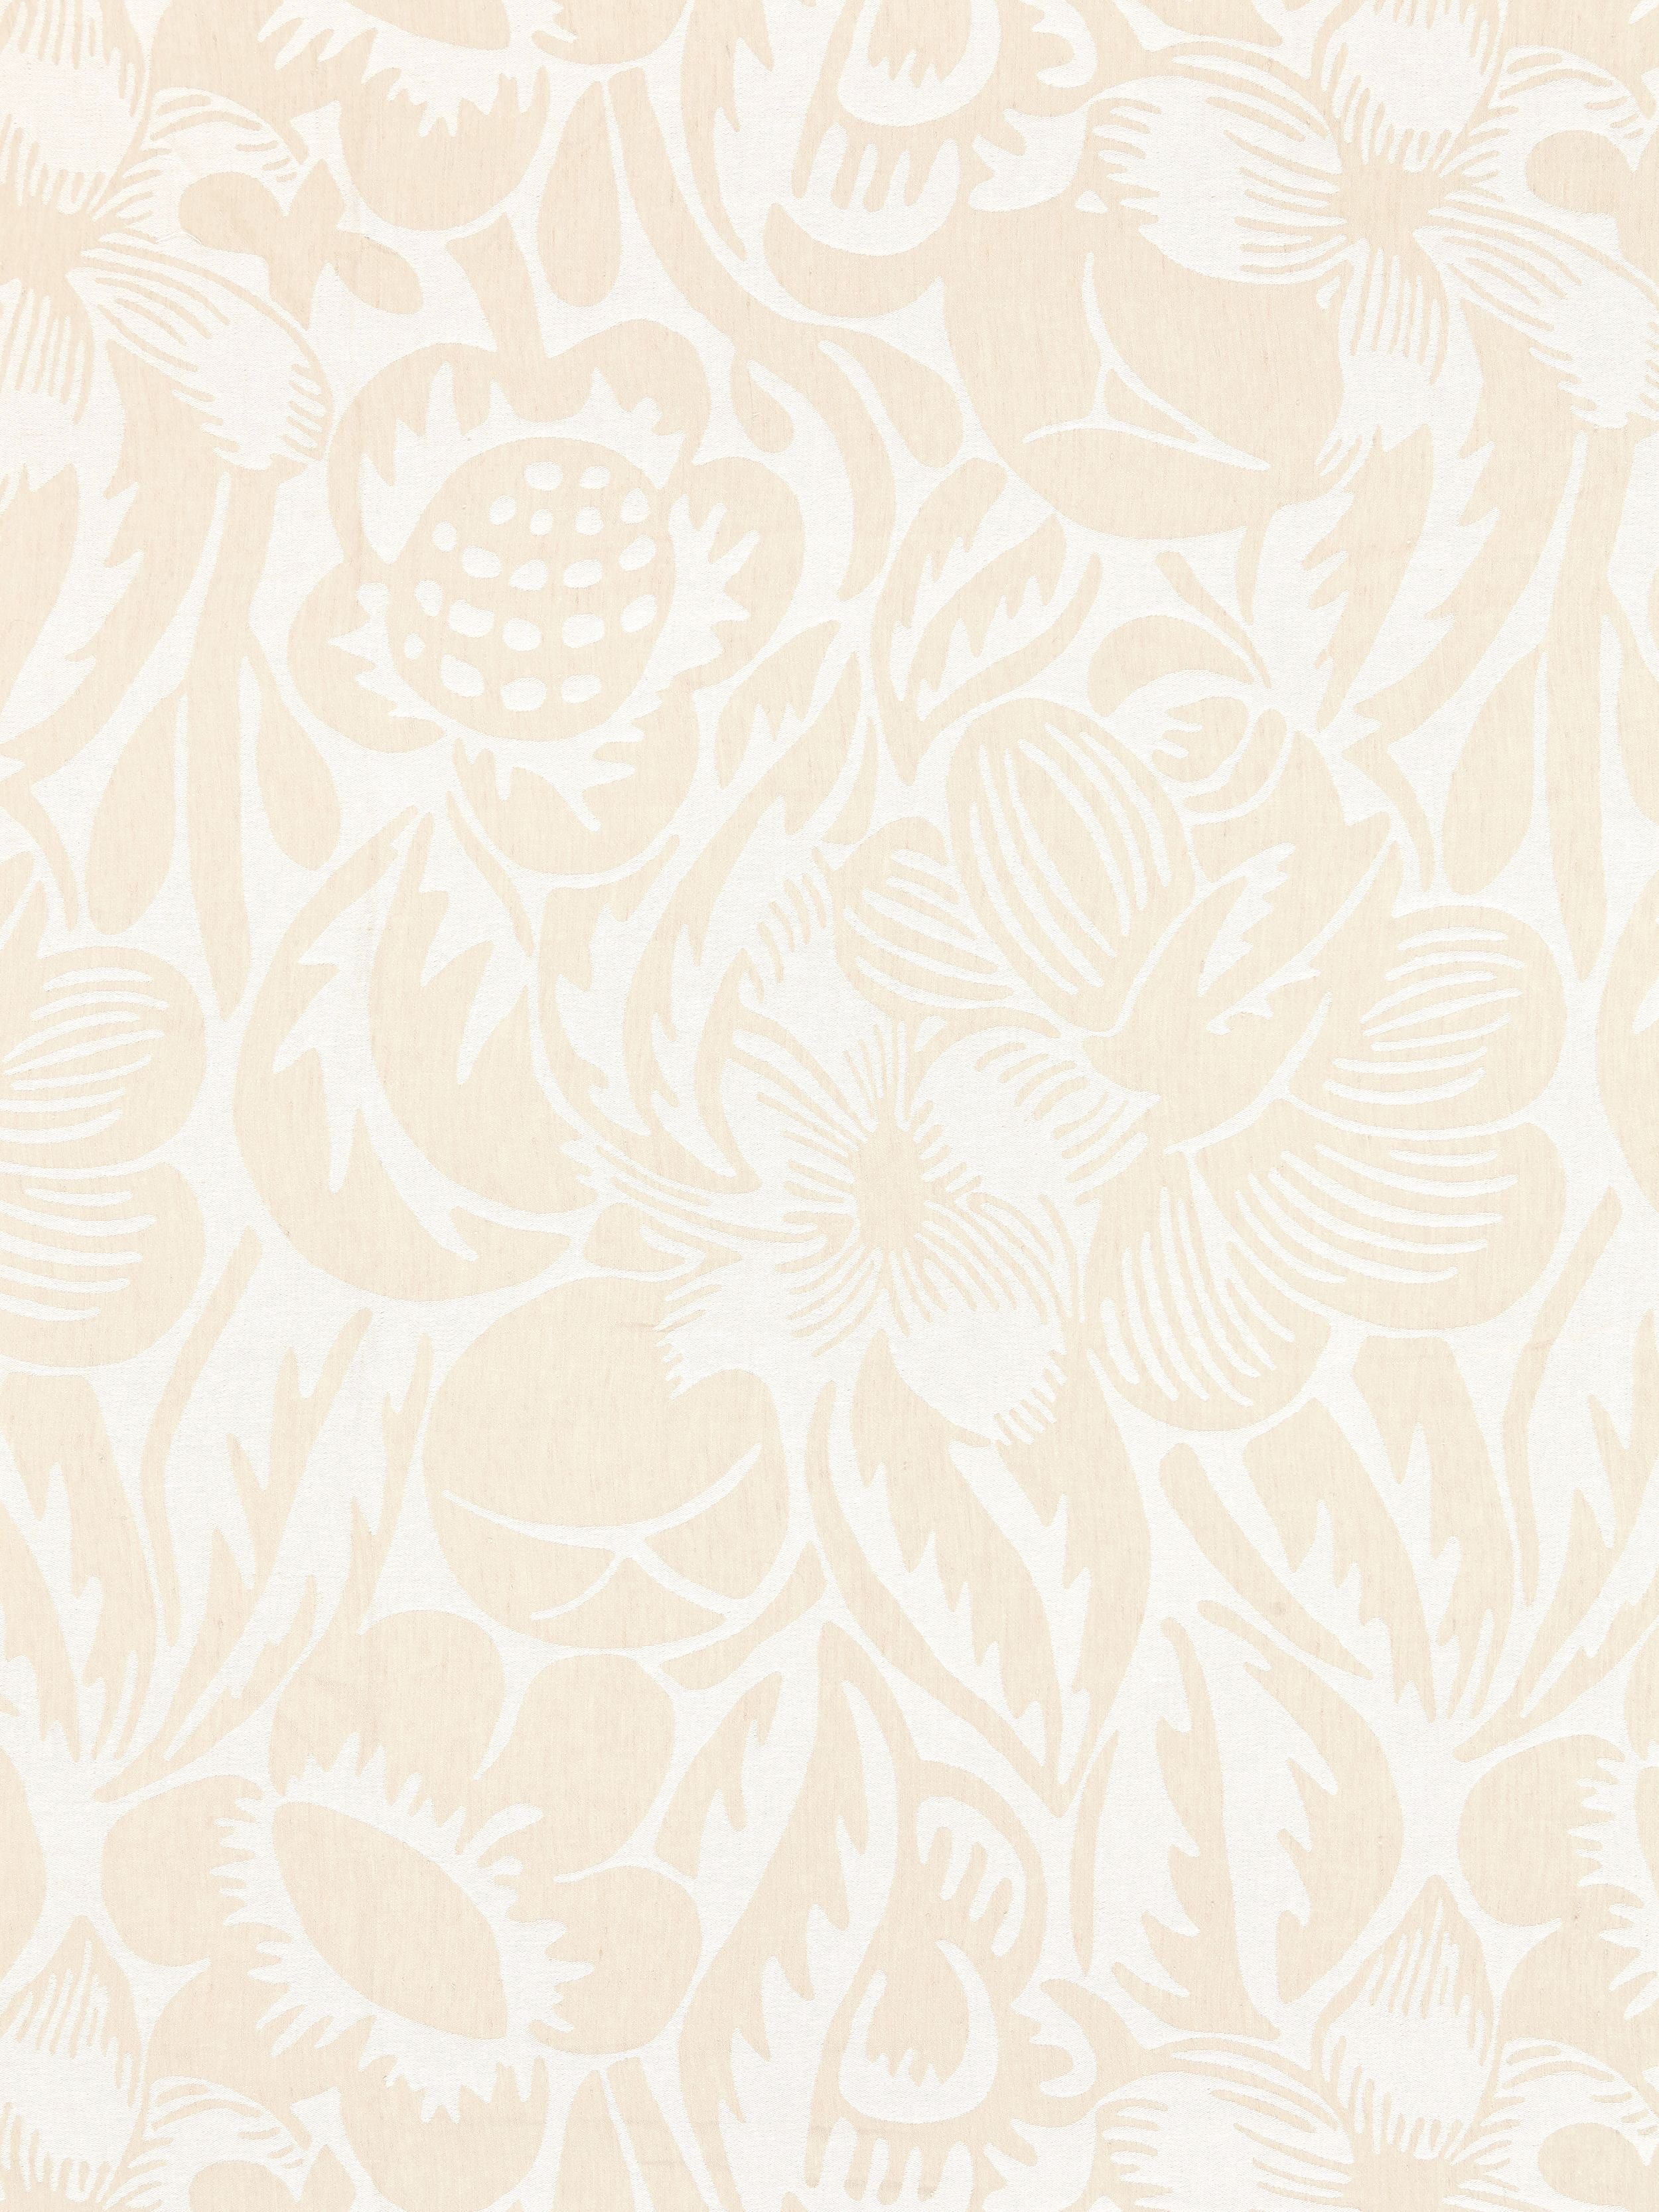 Deco Flower fabric in linen color - pattern number SC 000127131 - by Scalamandre in the Scalamandre Fabrics Book 1 collection